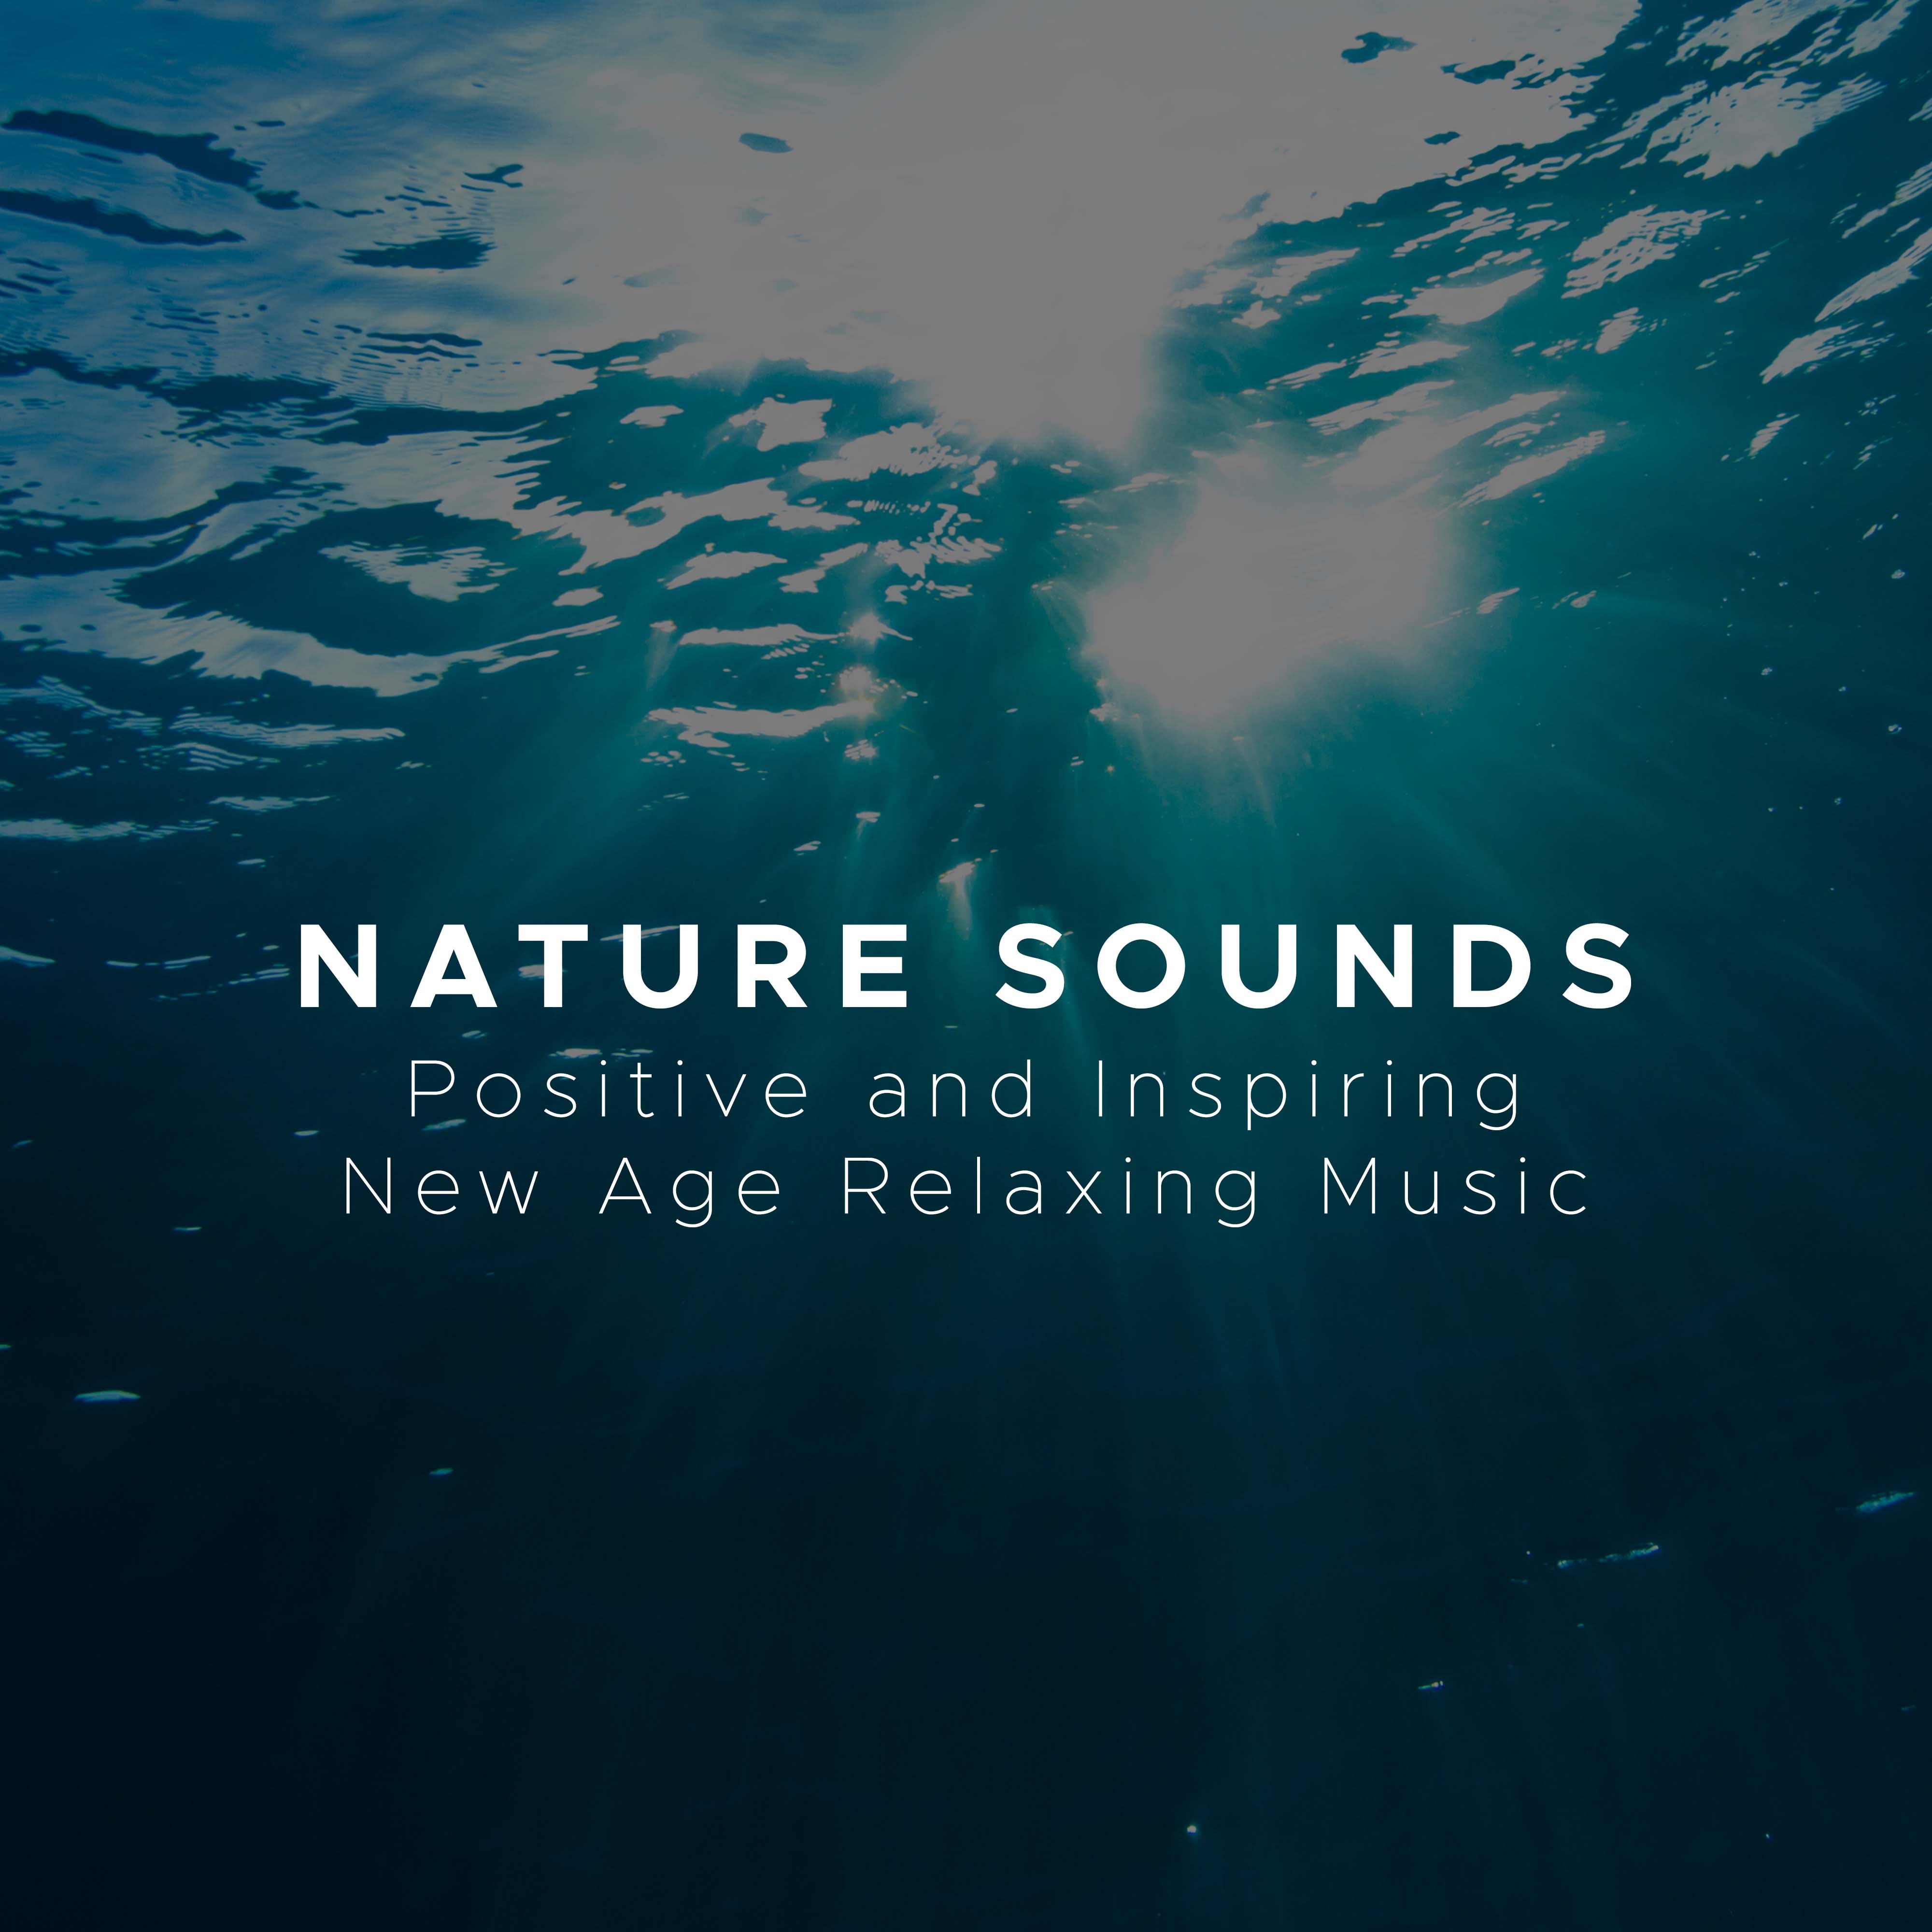 Nature Sounds - Positive and Inspiring New Age Relaxing Music